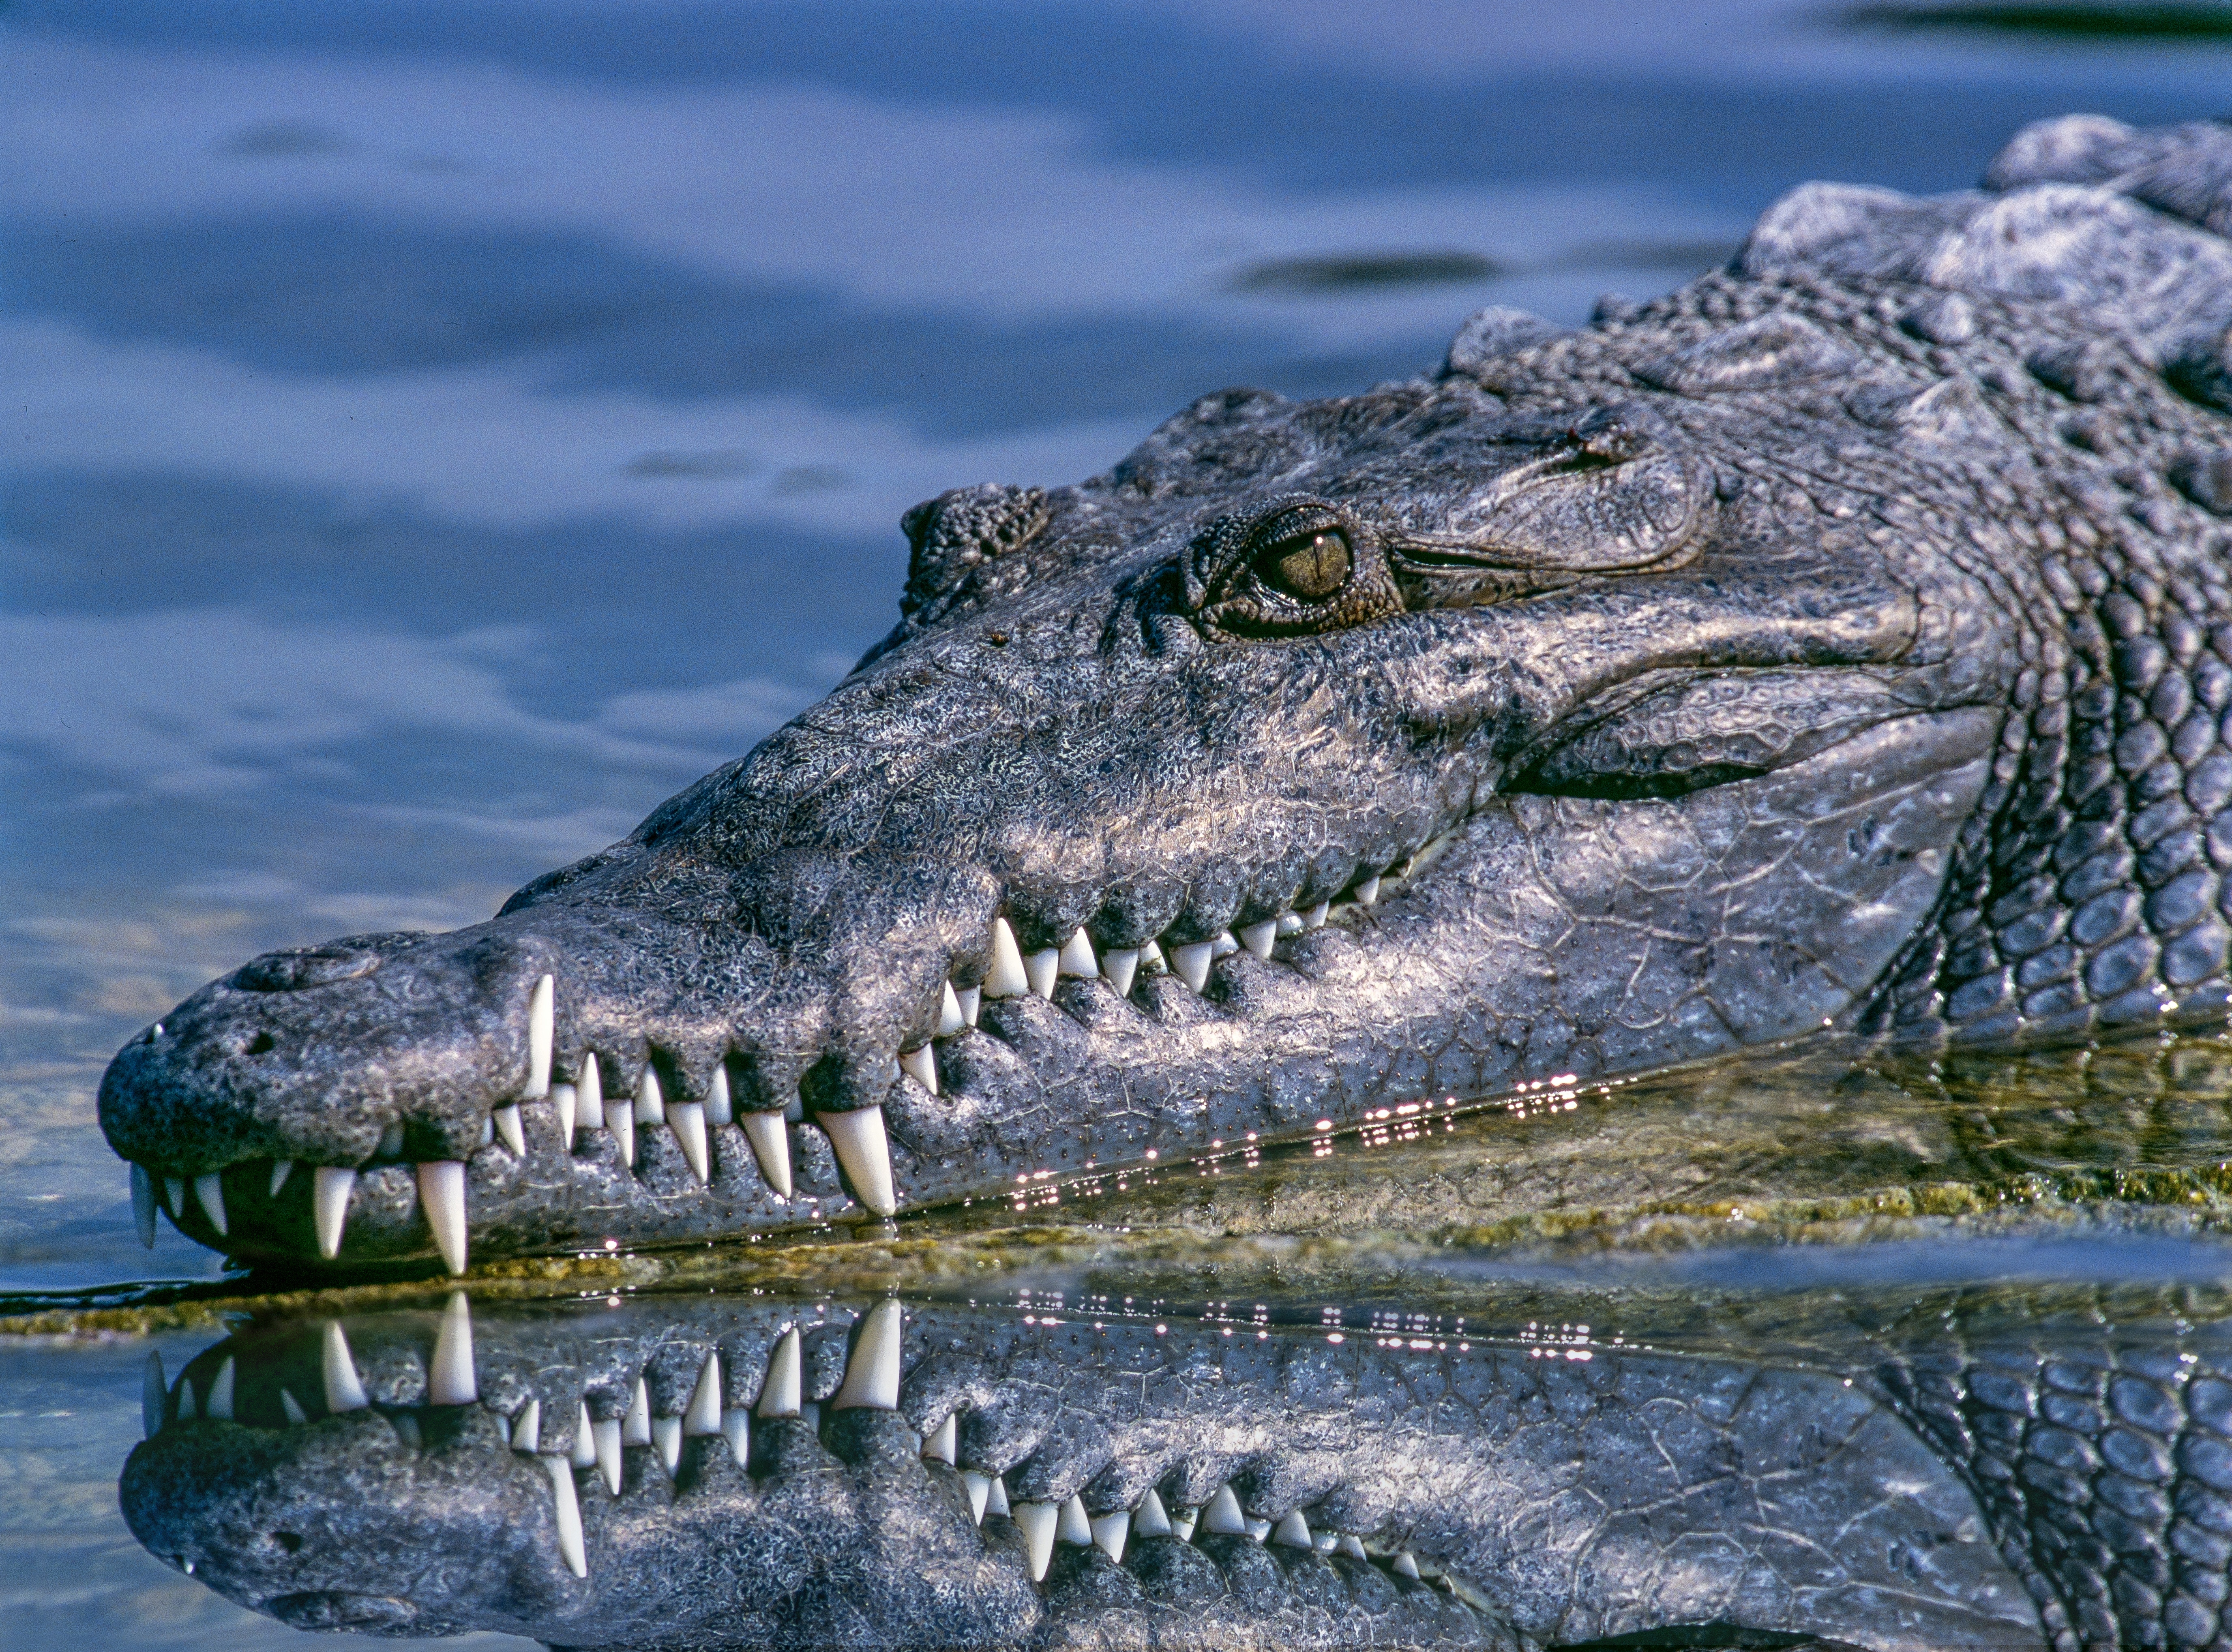 gray crocodile on body of water during daytime